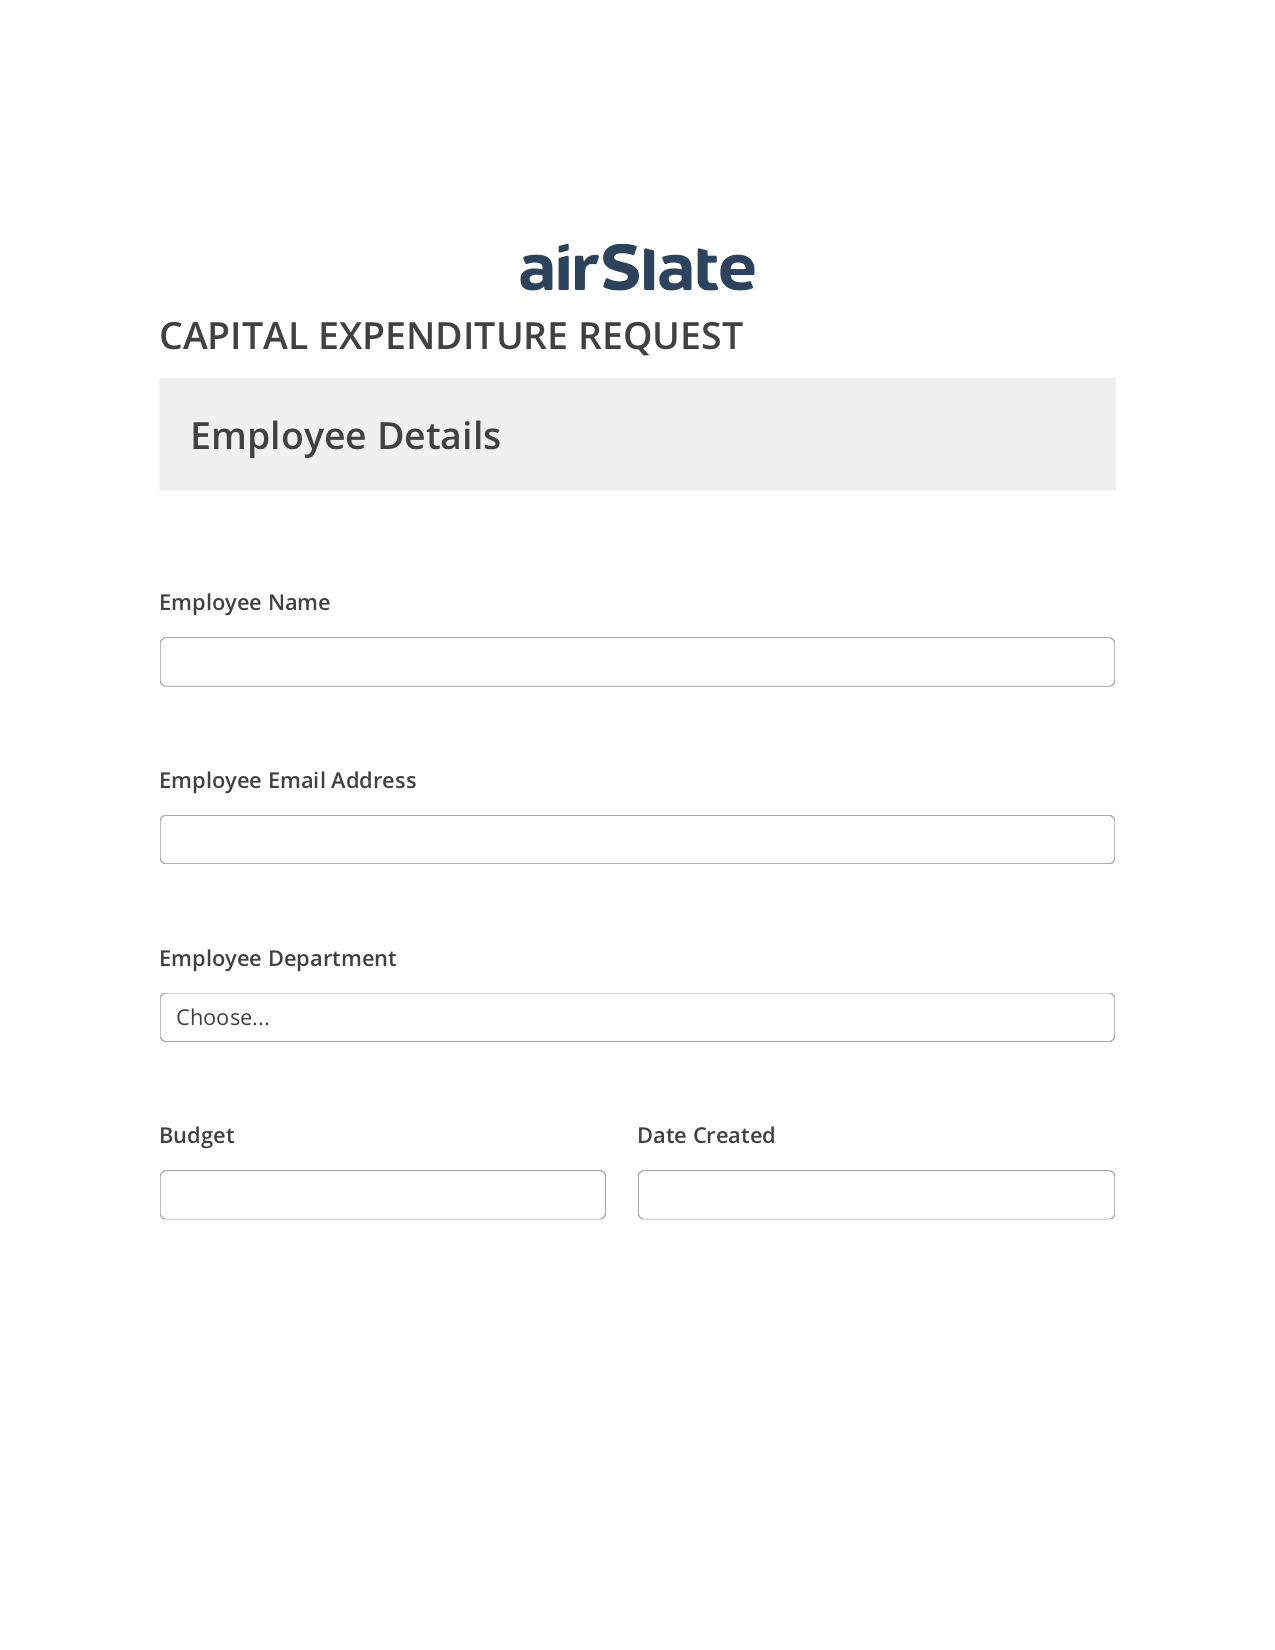 Multirole Capital Expenditure Request Approval Workflow Pre-fill Slate from MS Dynamics 365 record, Send a Slate to MS Dynamics 365 Contact Bot, Archive to OneDrive Bot